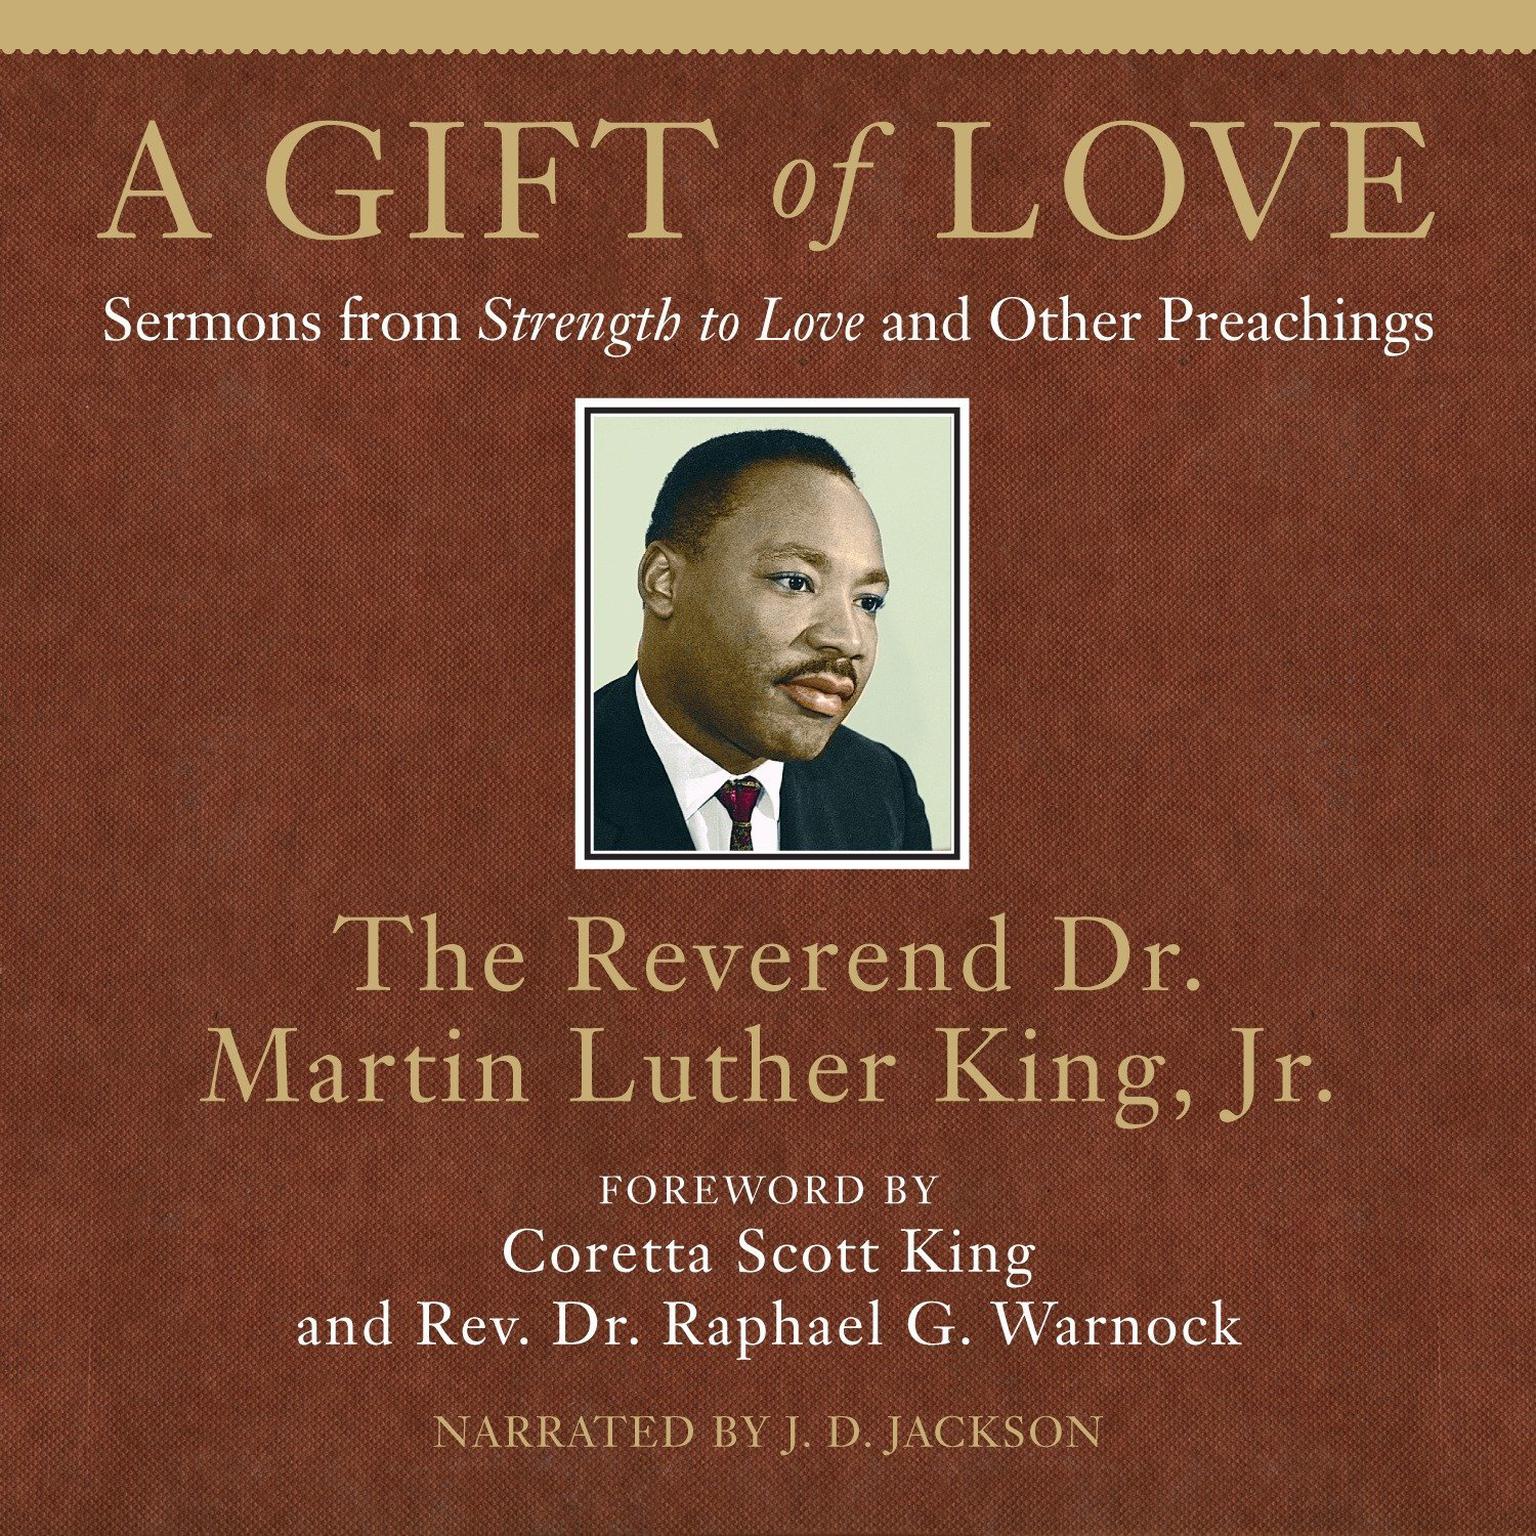 A Gift of Love: Sermons from Strength to Love and Other Preachings Audiobook, by Martin Luther King